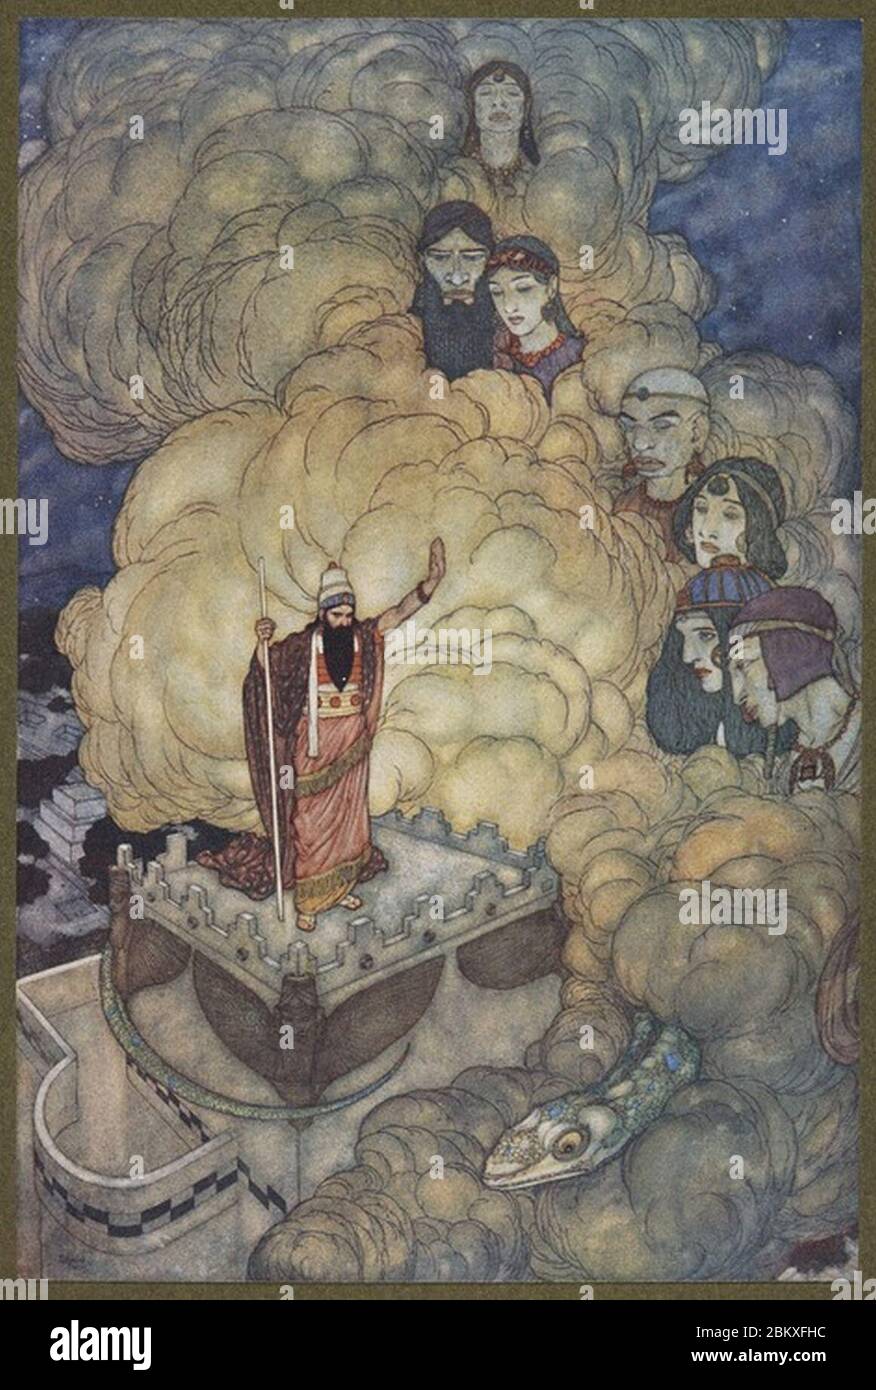 Illustration by Edmund Dulac from One Thousand and One Nights 09. Stock Photo